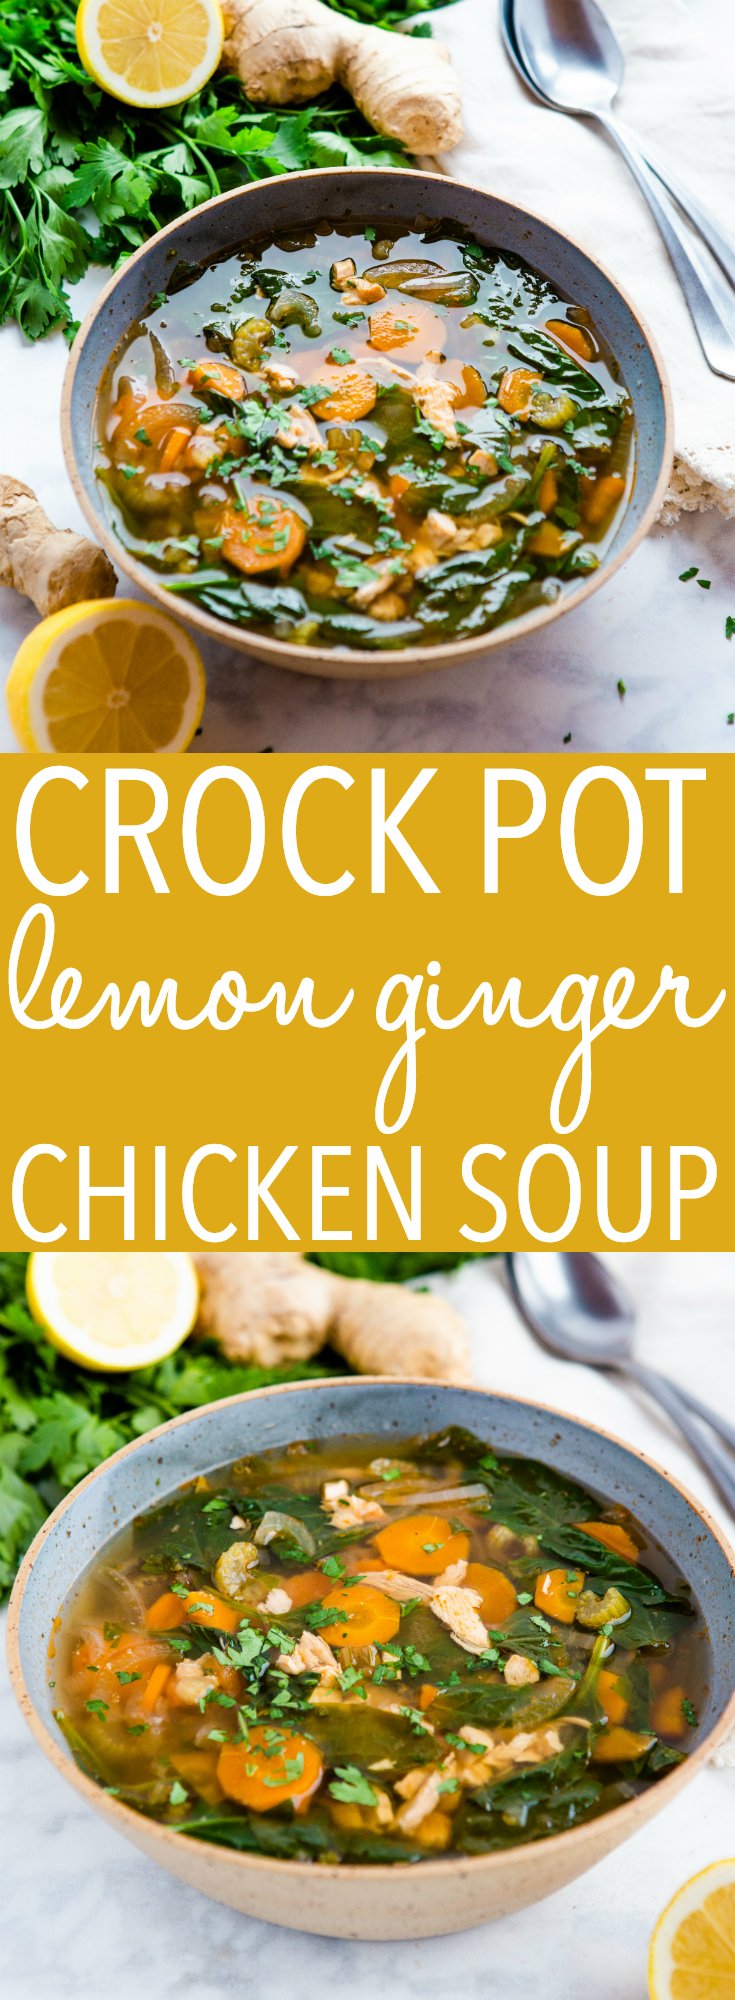 This Crock Pot Lemon Ginger Chicken Soup is the perfect easy-to-make winter soup for cold and flu season! It's packed with healing ingredients and it's bursting with fresh flavours! Recipe from thebusybaker.ca! #crockpot #slowcooker #lemon #ginger #chicken #soup #homeremedy #homemade #sick #sickness #cure #healthy #health #wholesome #spinach #veggies #easy #recipe #winter #spring via @busybakerblog